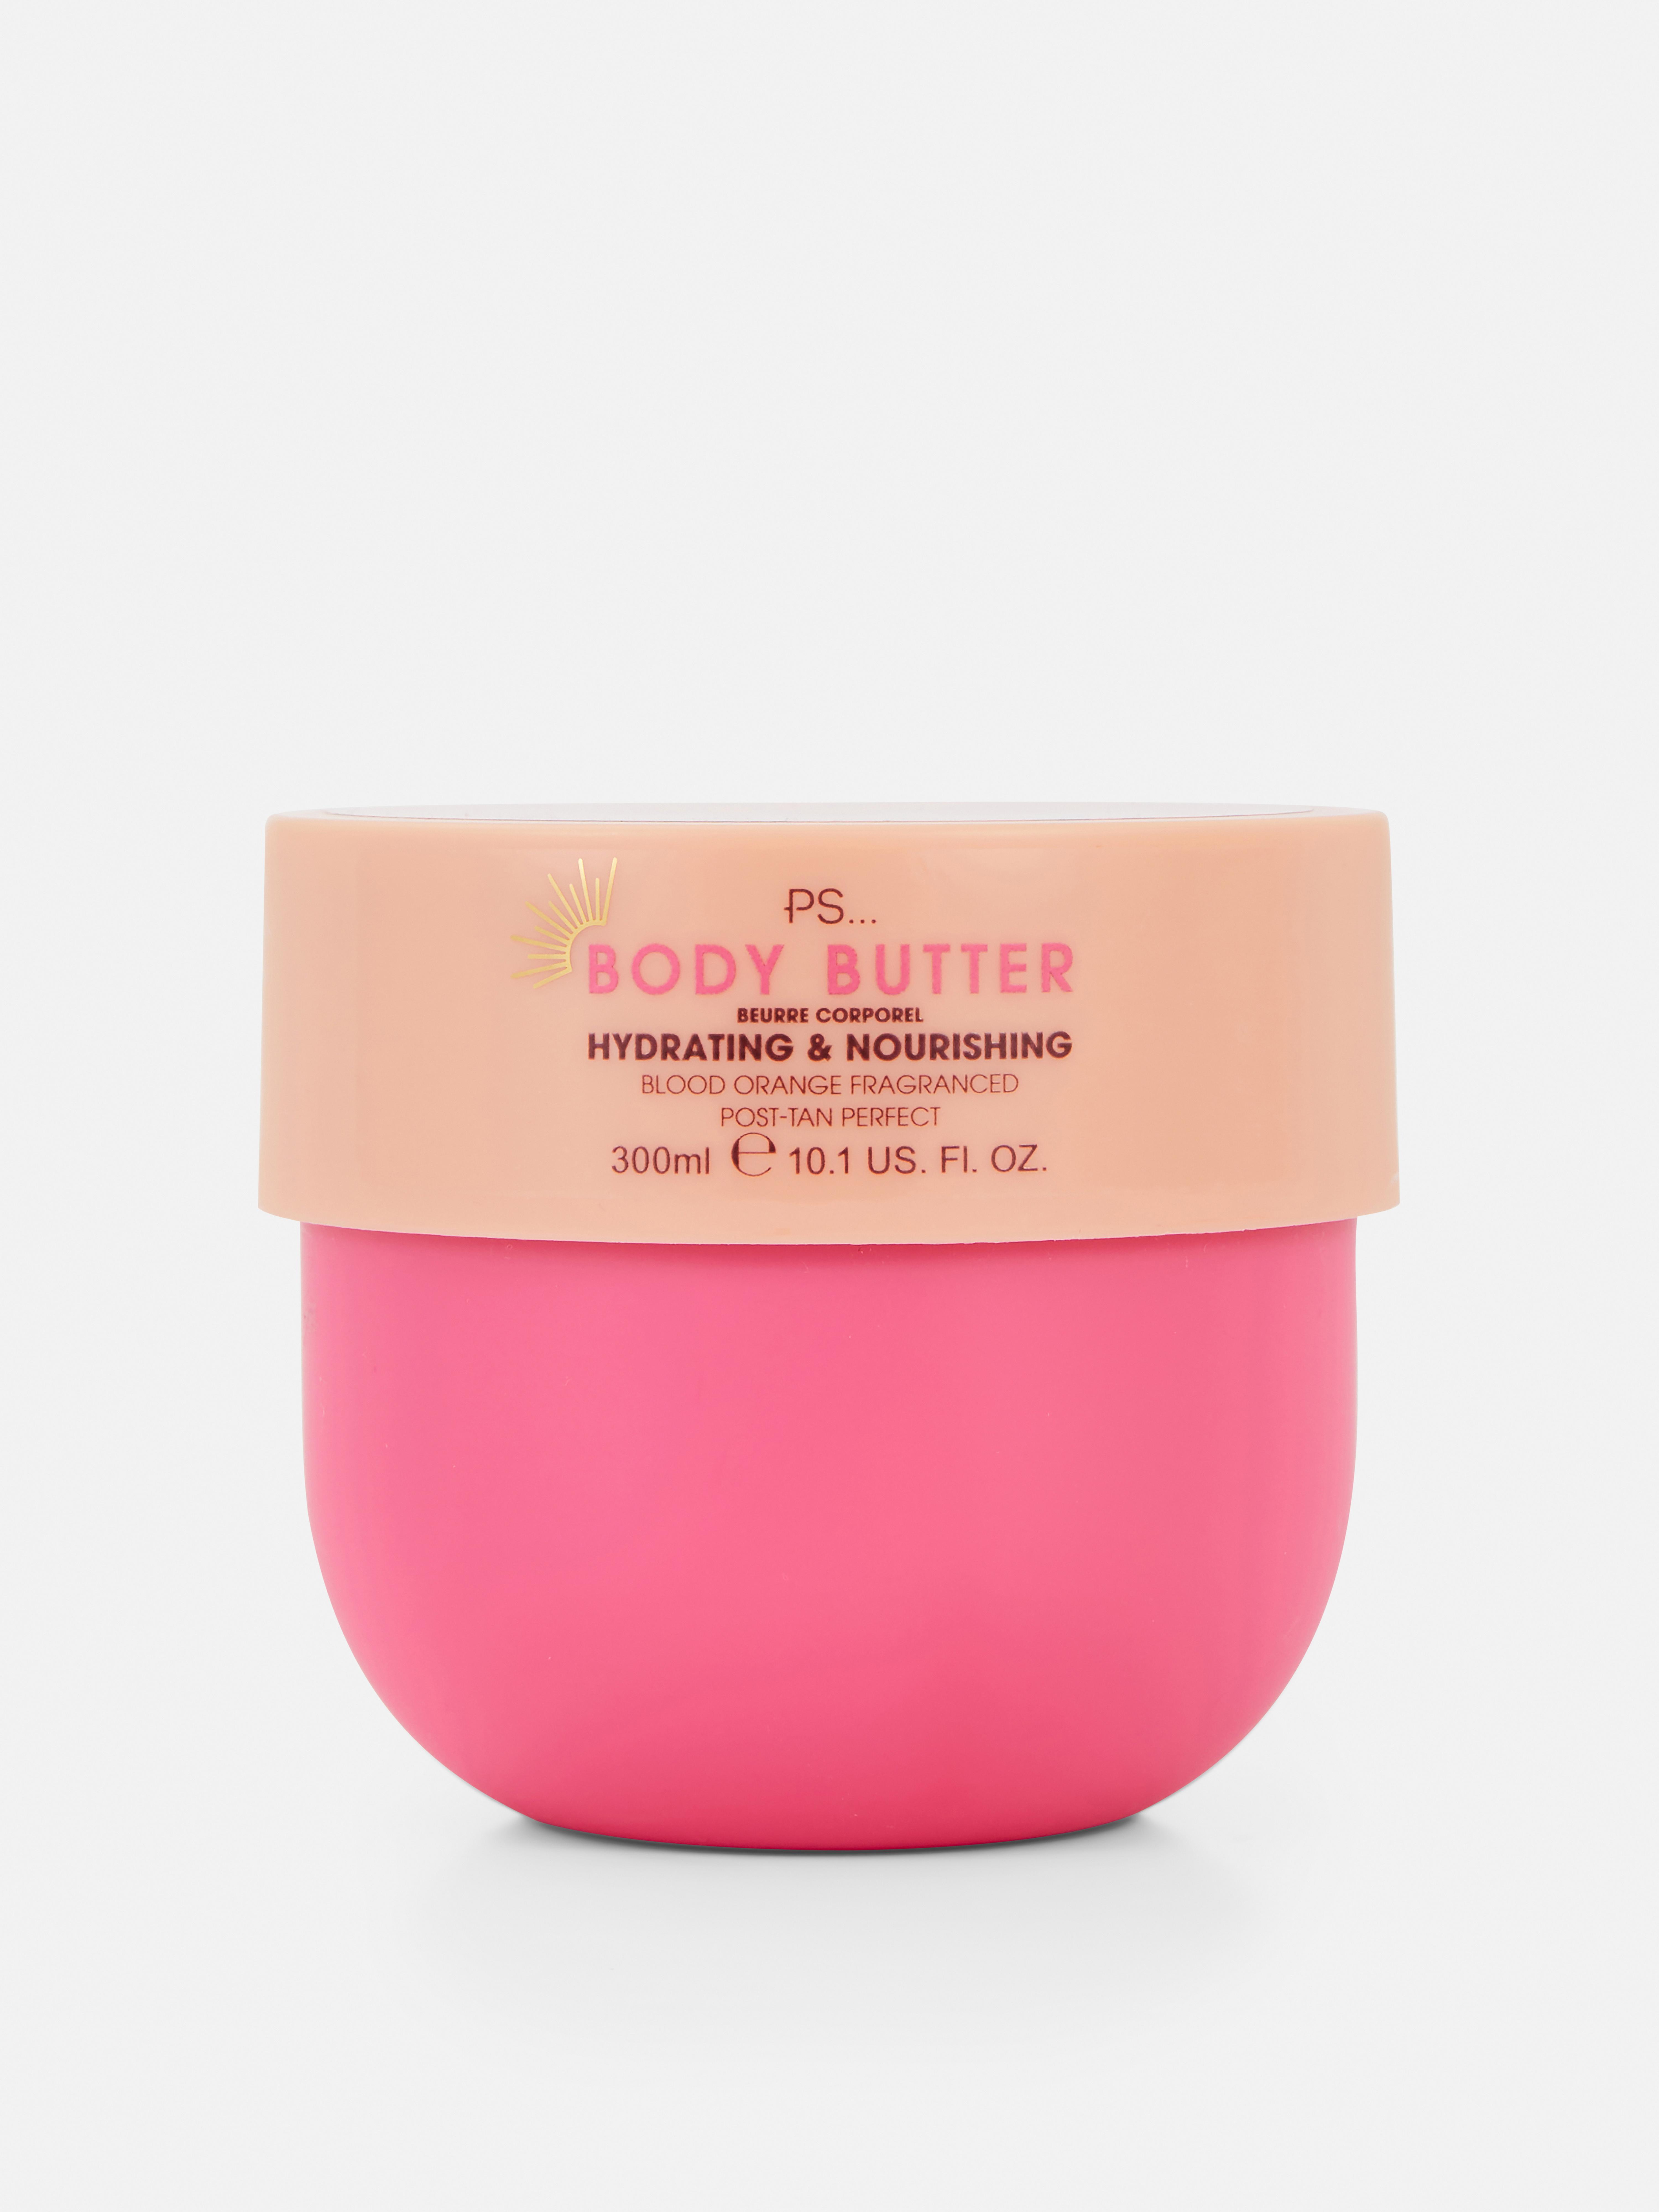 PS... Post-Tan Body Butter